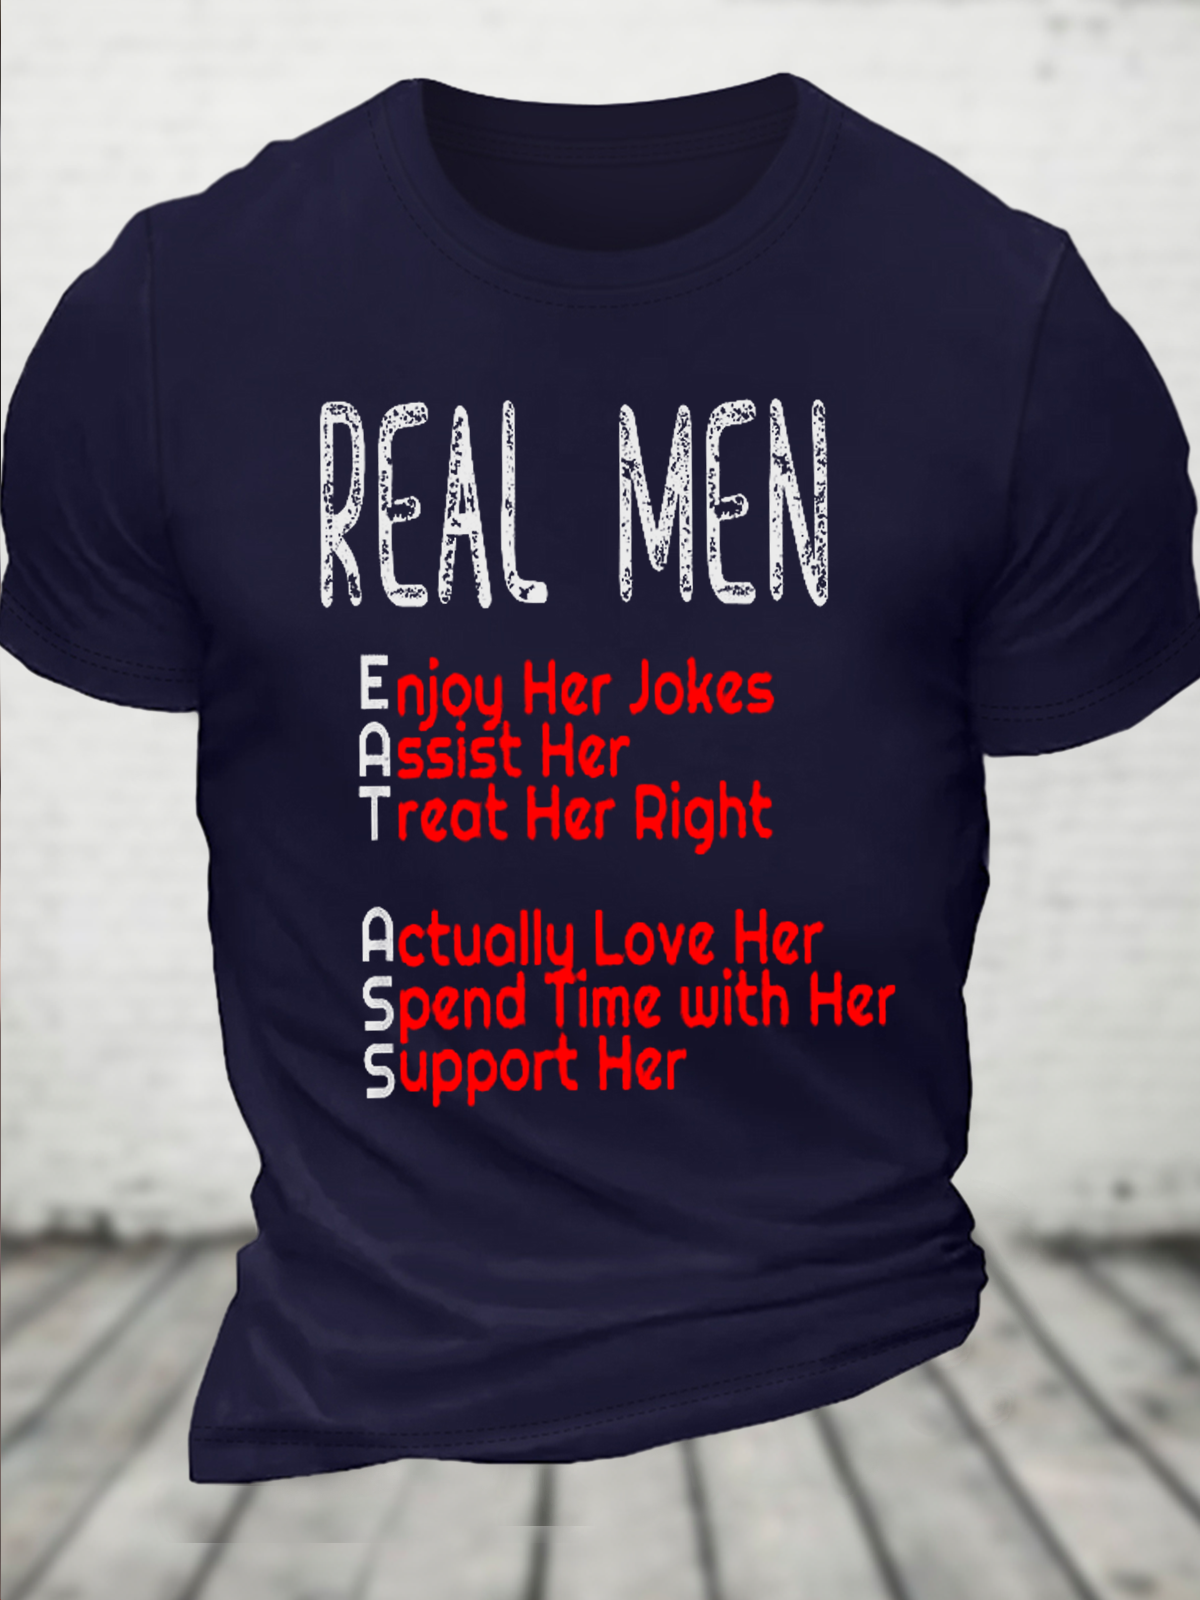 Cotton Real Men Eat Ass Funny Casual Crew Neck Text Letters T-Shirt